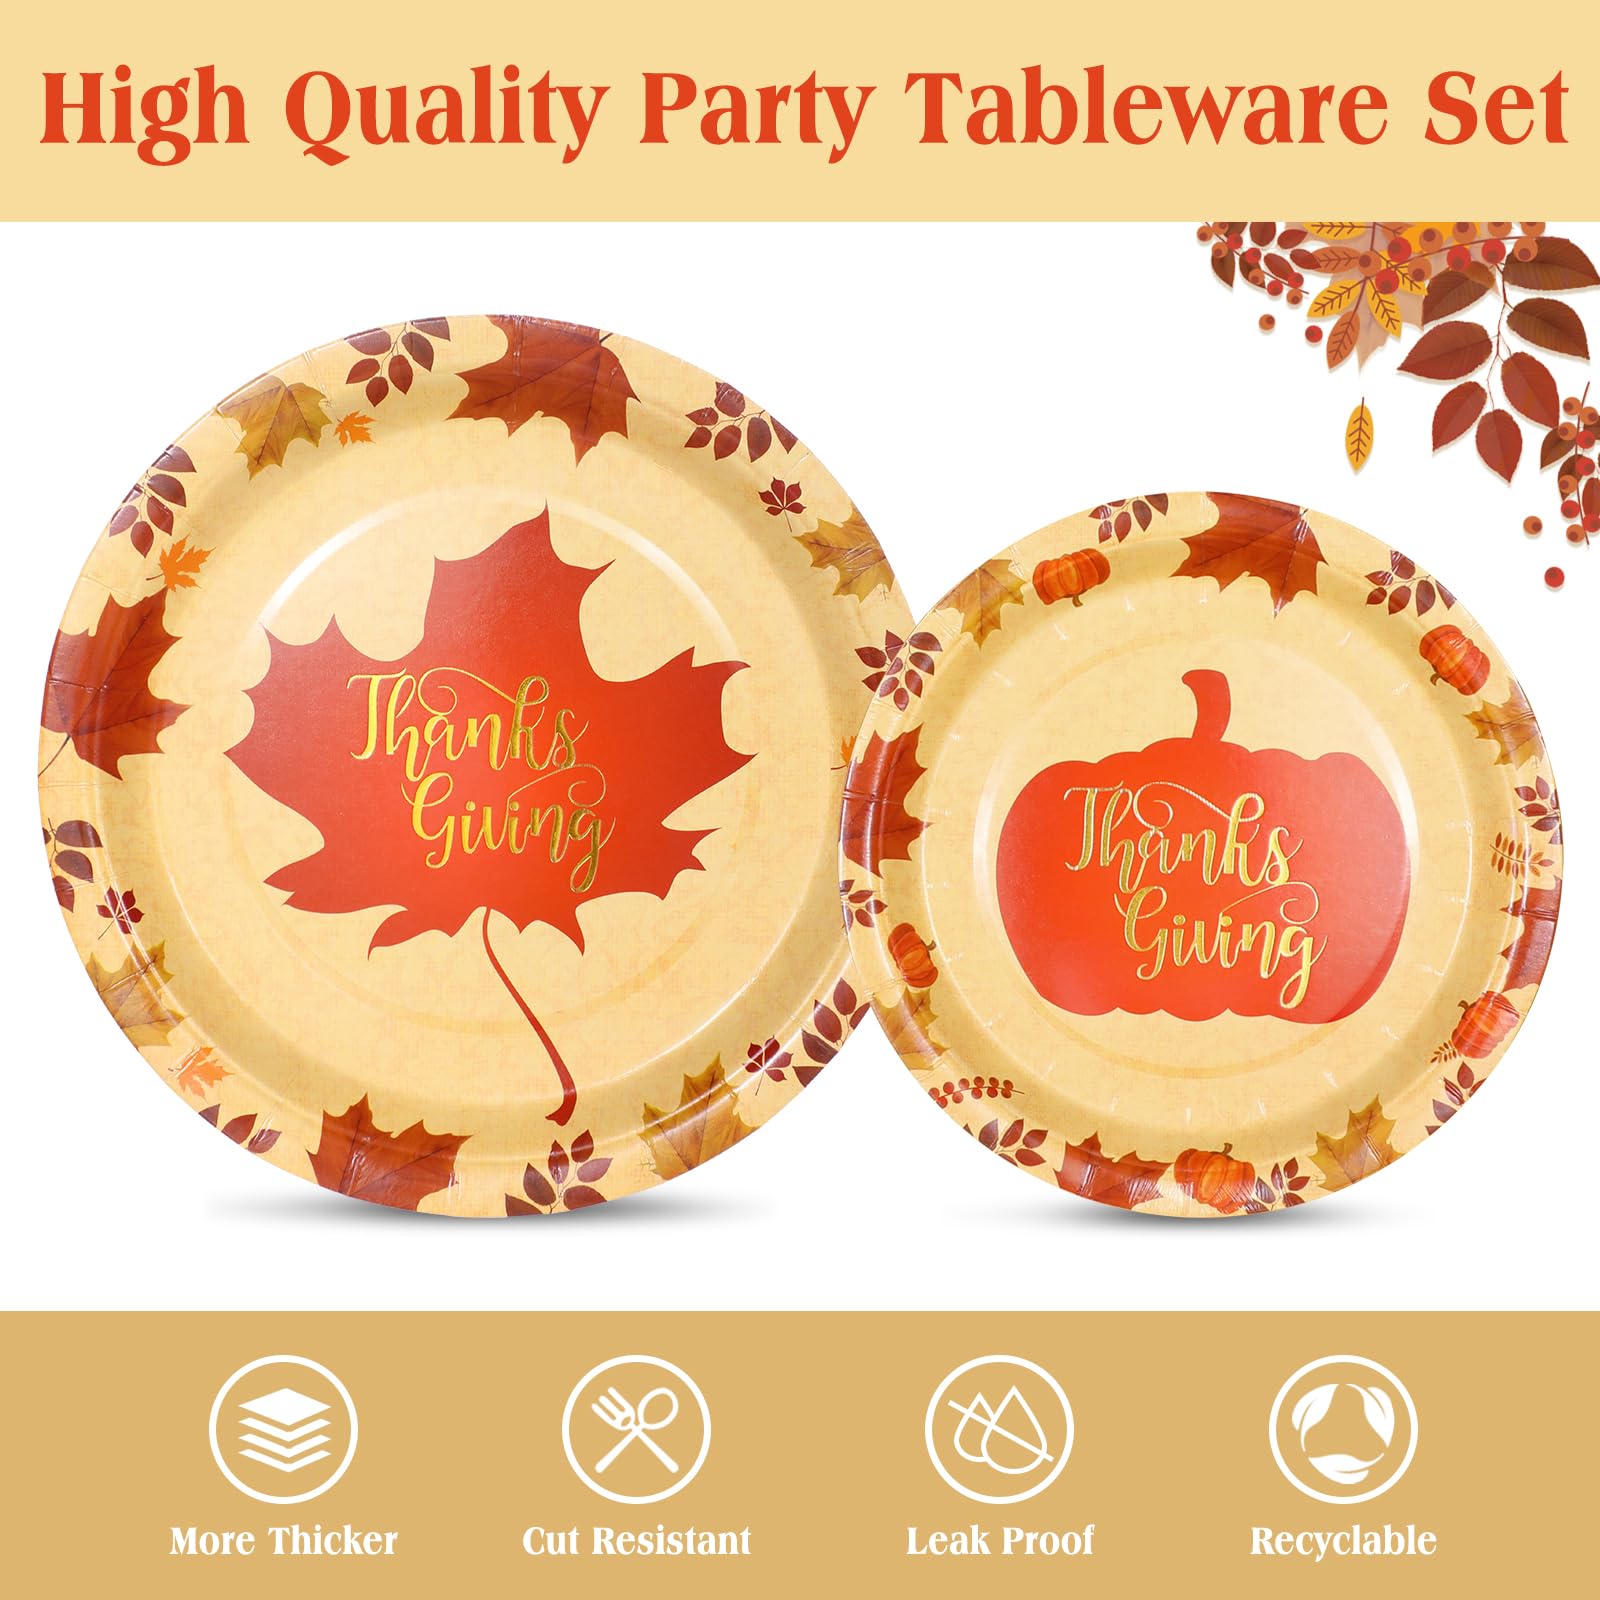 High quality disposable tableware